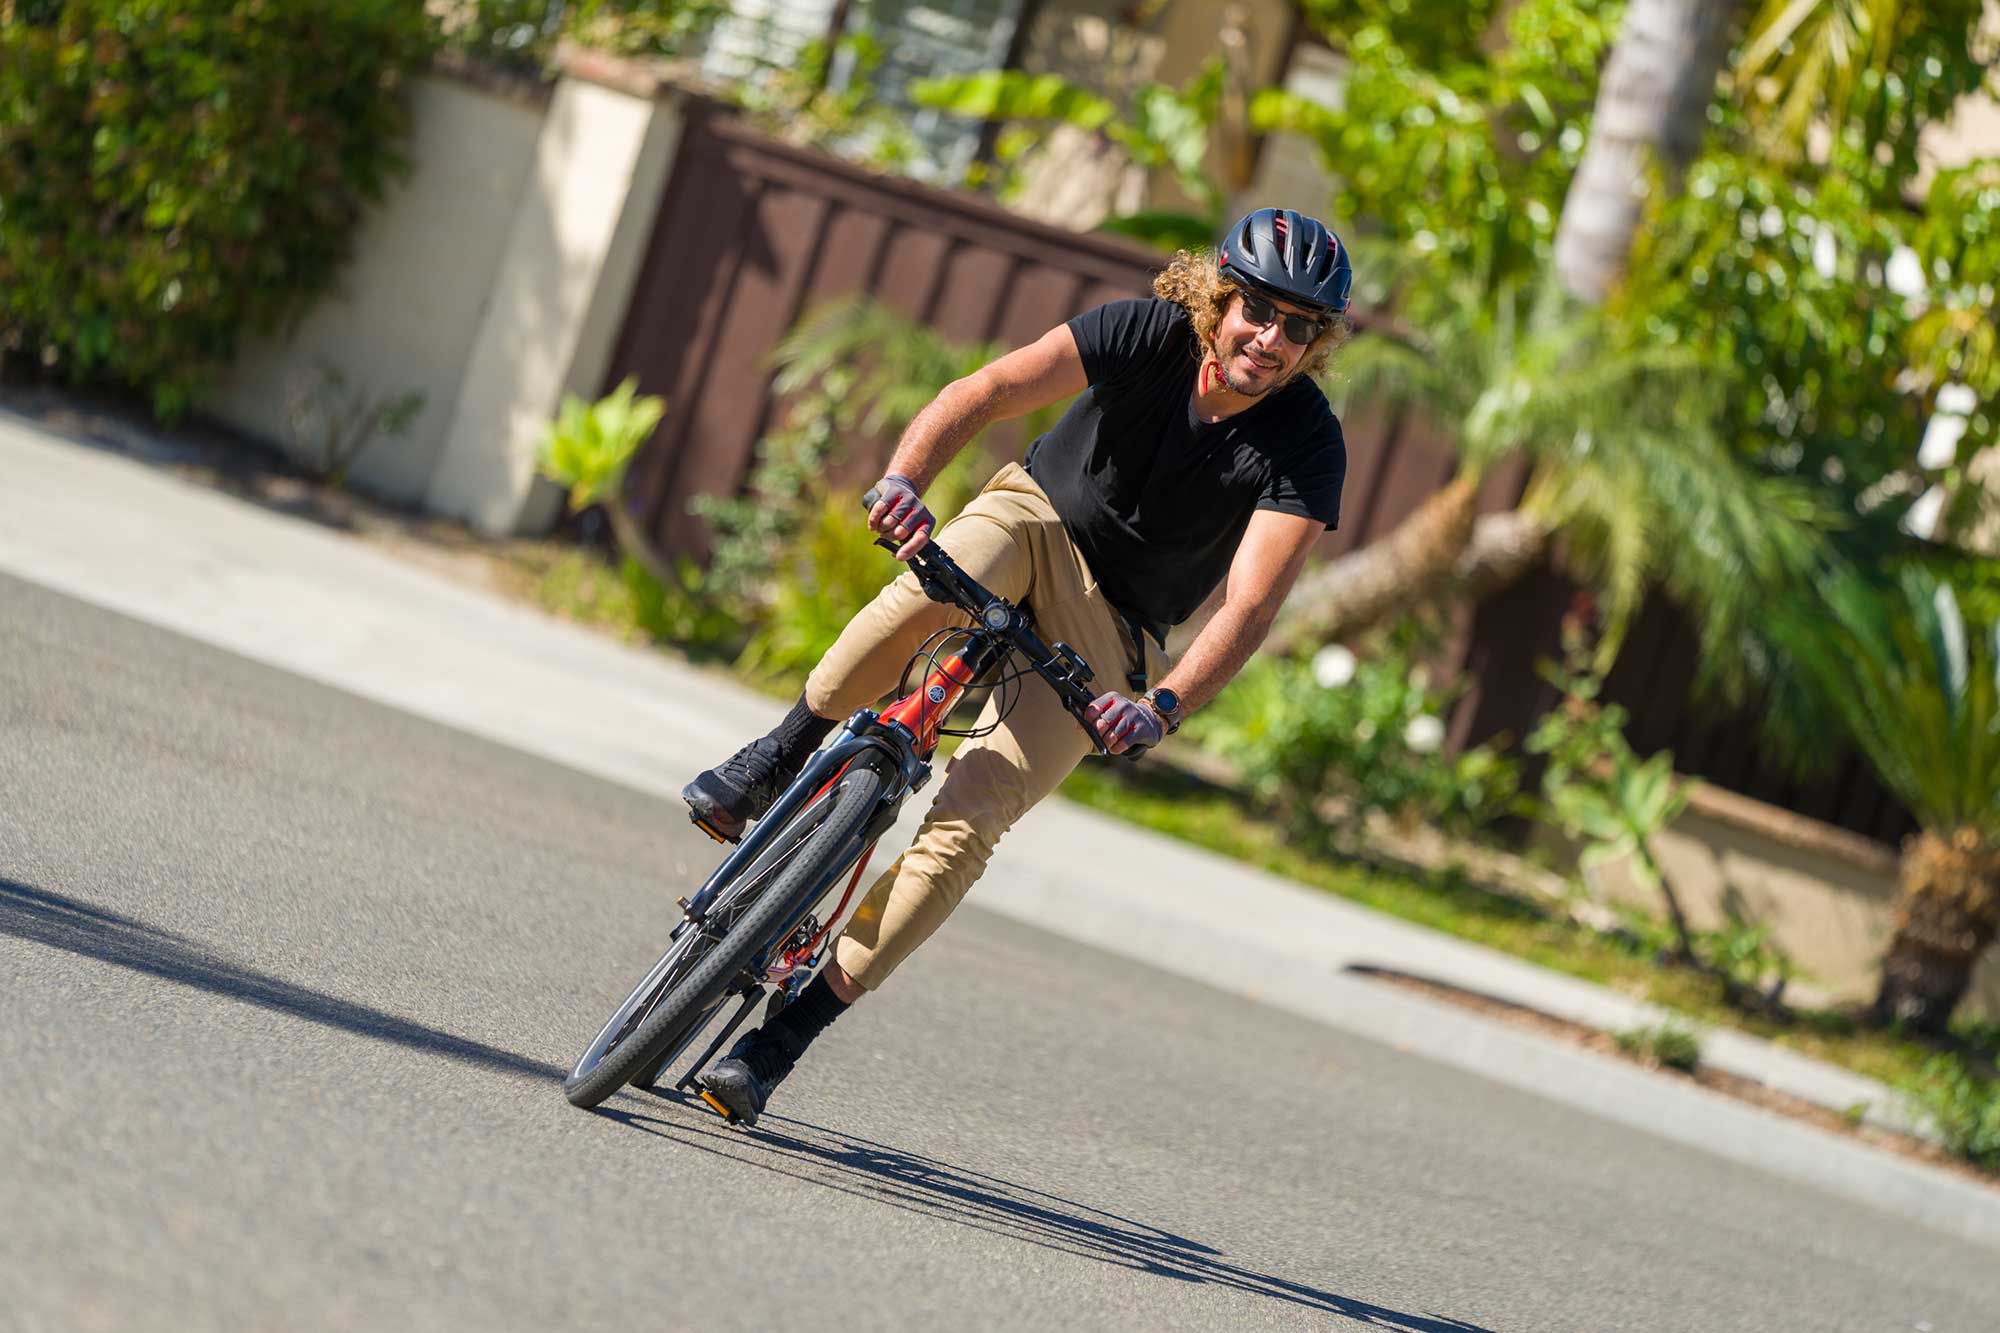 Yamaha Bicycles pedal-assist bicycles are an affordable and hassle-free way to get around town.